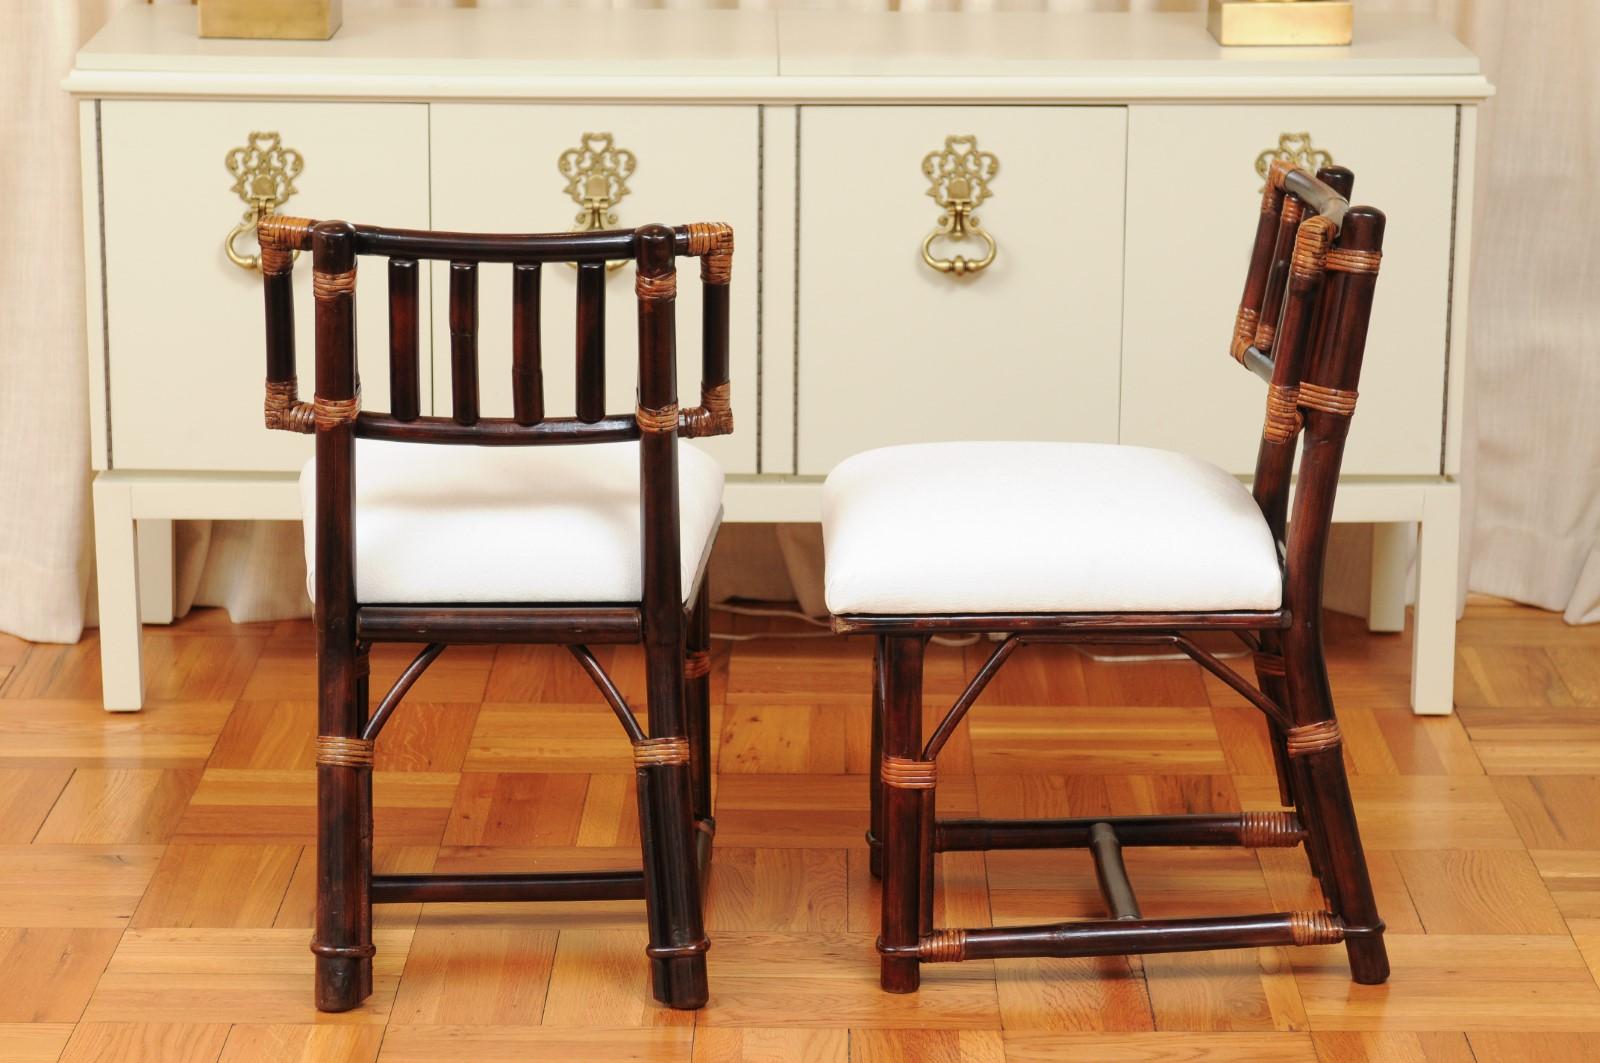 Radiant Set of 8 Rattan Chairs in Cordovan and Caramel by Wisner for Ficks Reed For Sale 2